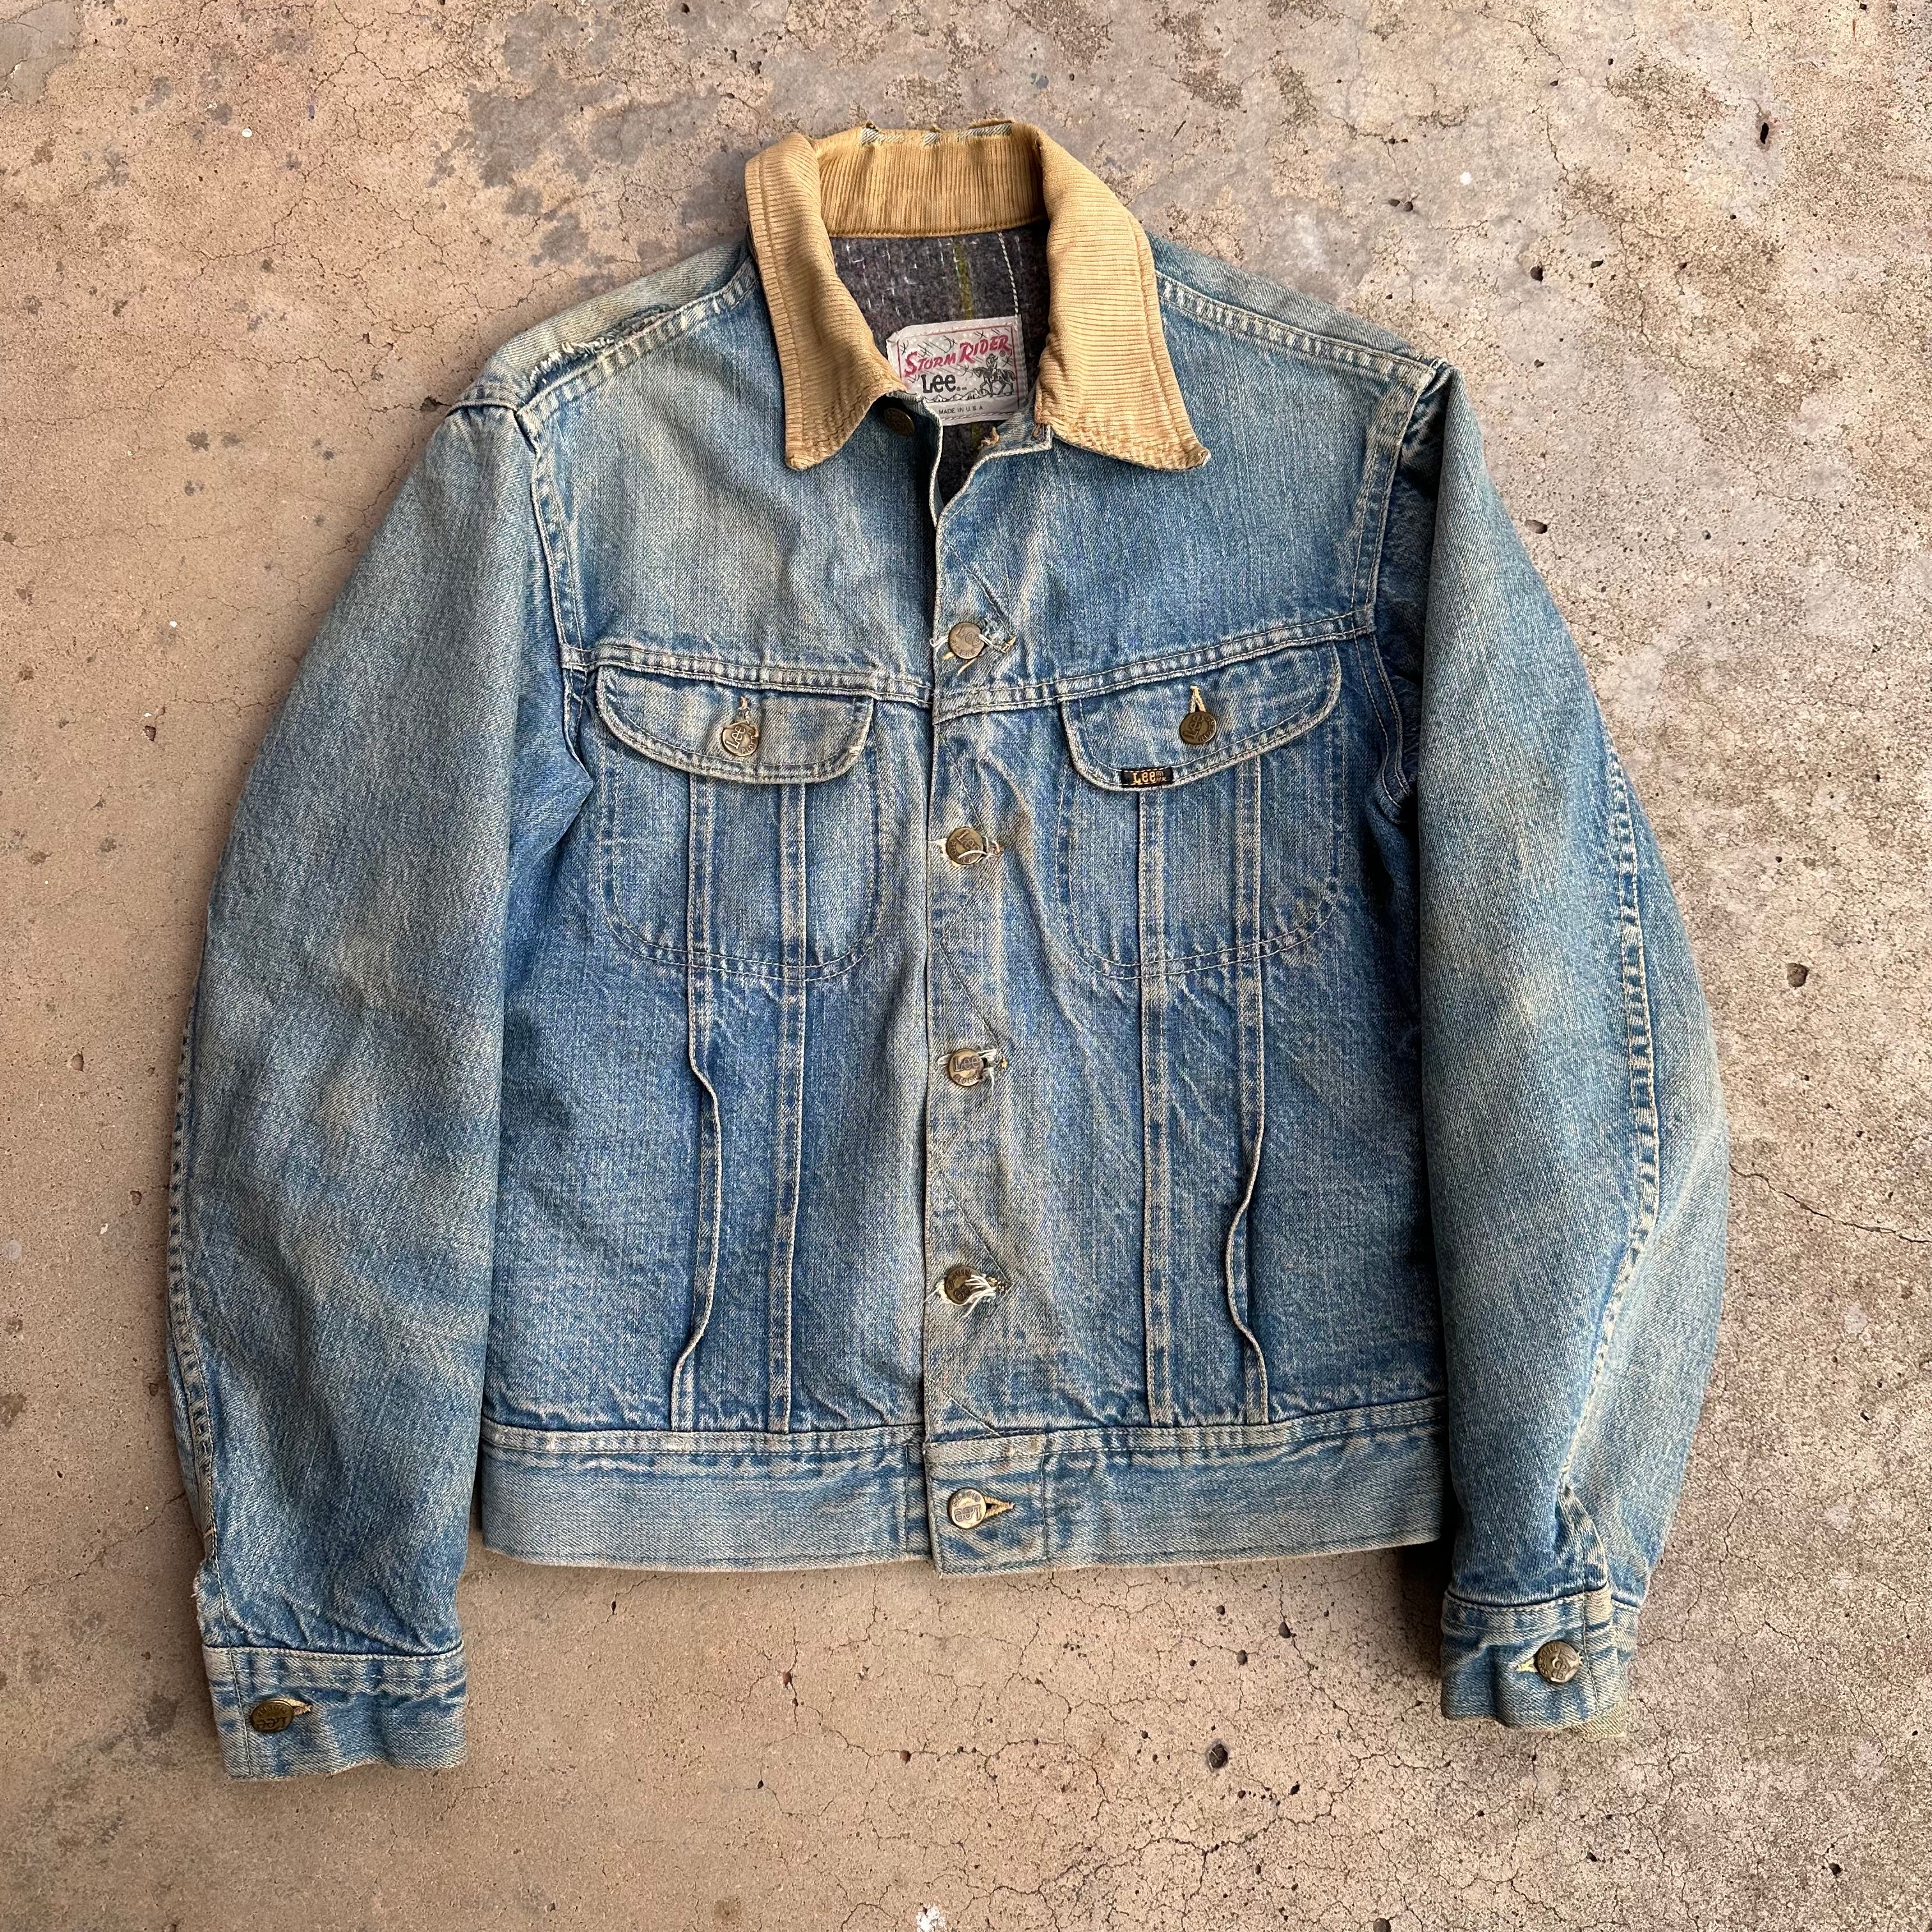 Lee Storm Rider Blanket Lined Waist Denim Jacket Chest 48 VINTAGE Early  1970 - La Paz County Sheriff's Office 